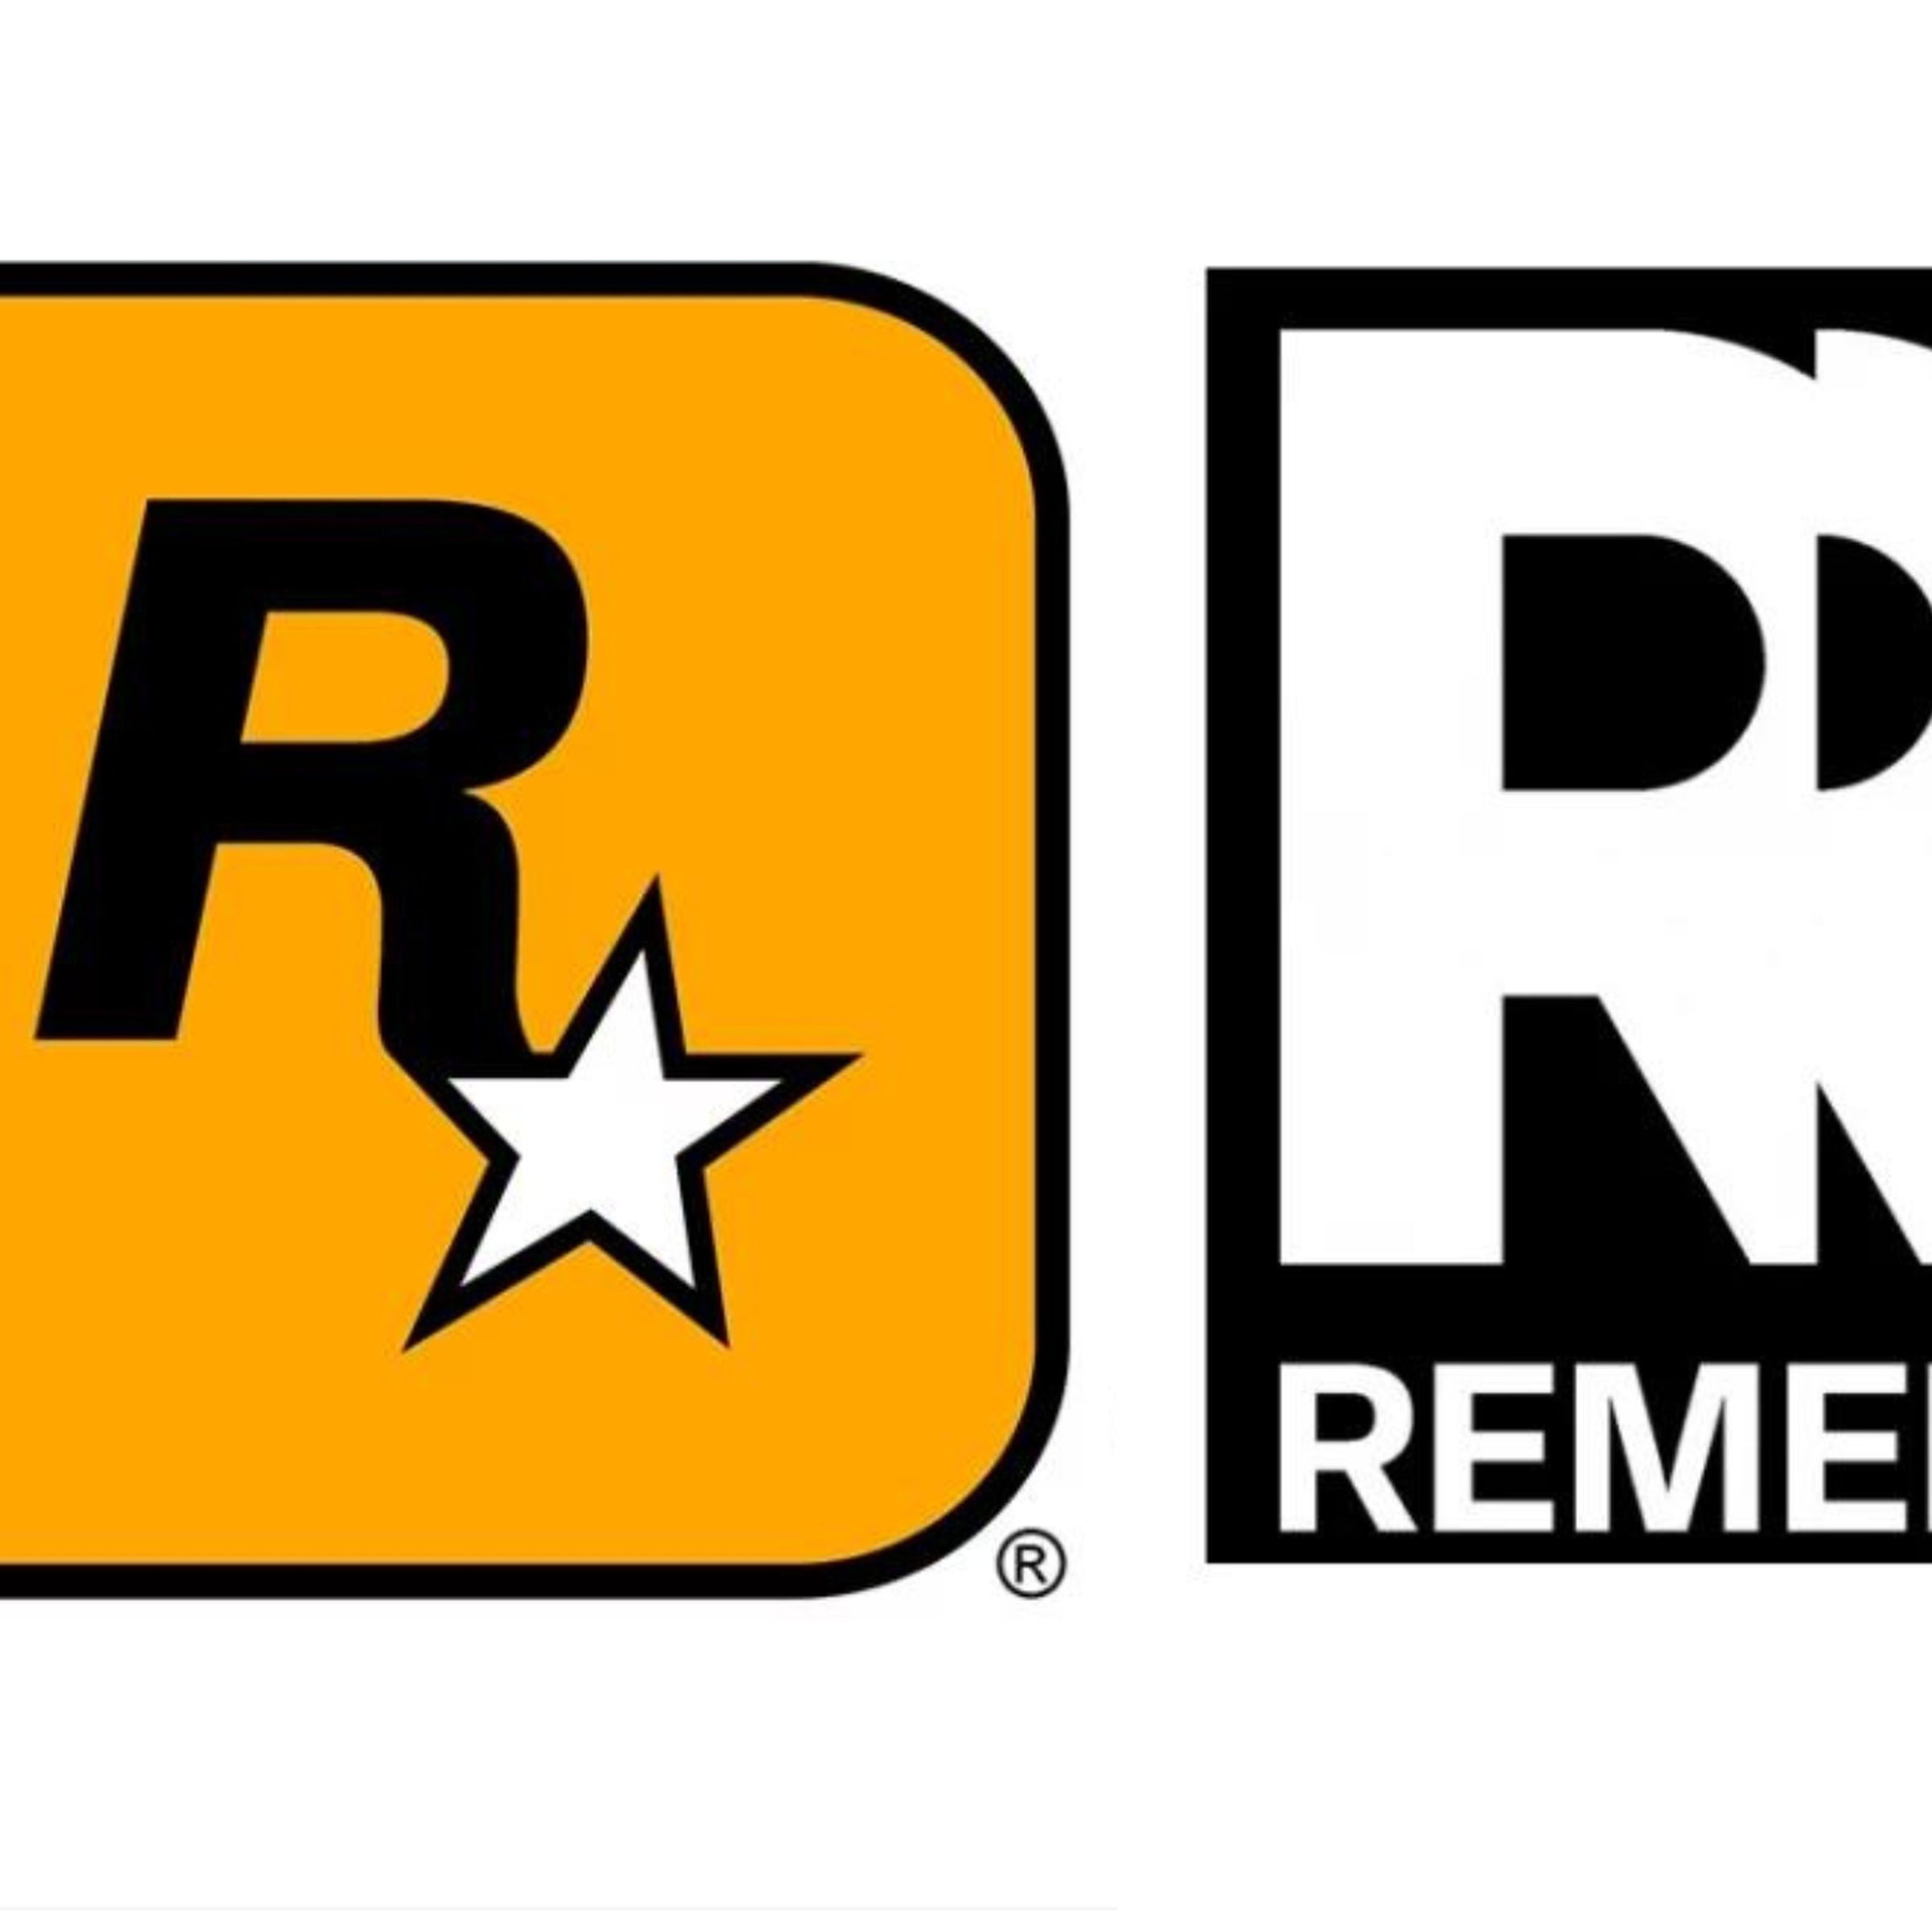 The logos for Rockstar Games and Remedy Entertainment